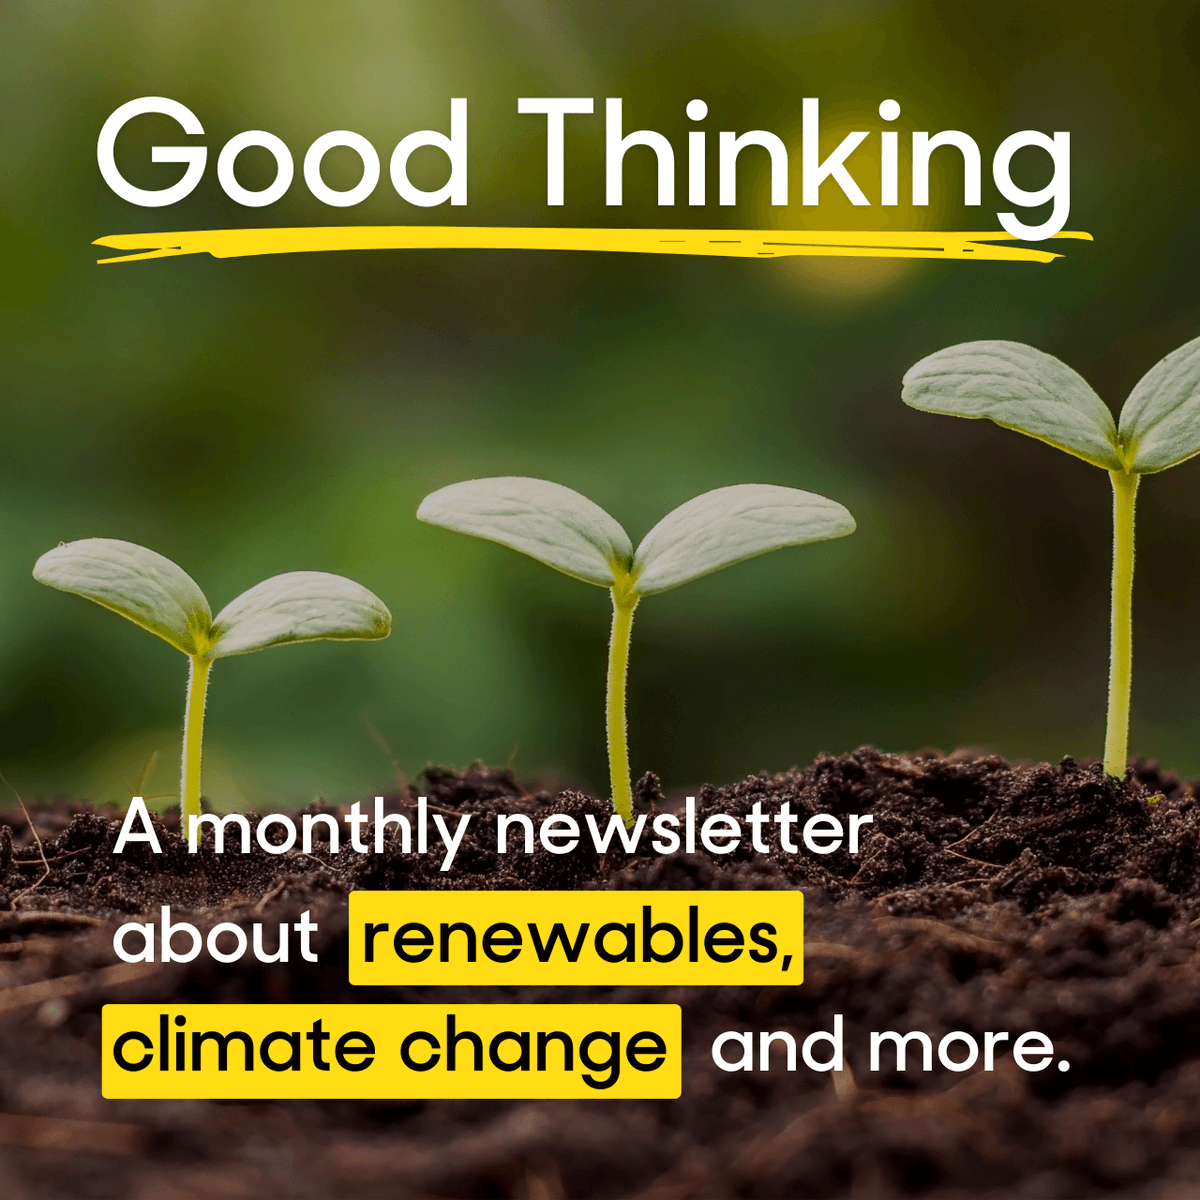 Looking for eco-news in your inbox? Our latest newsletter drops today. Sign up here: bit.ly/3yiRGBB